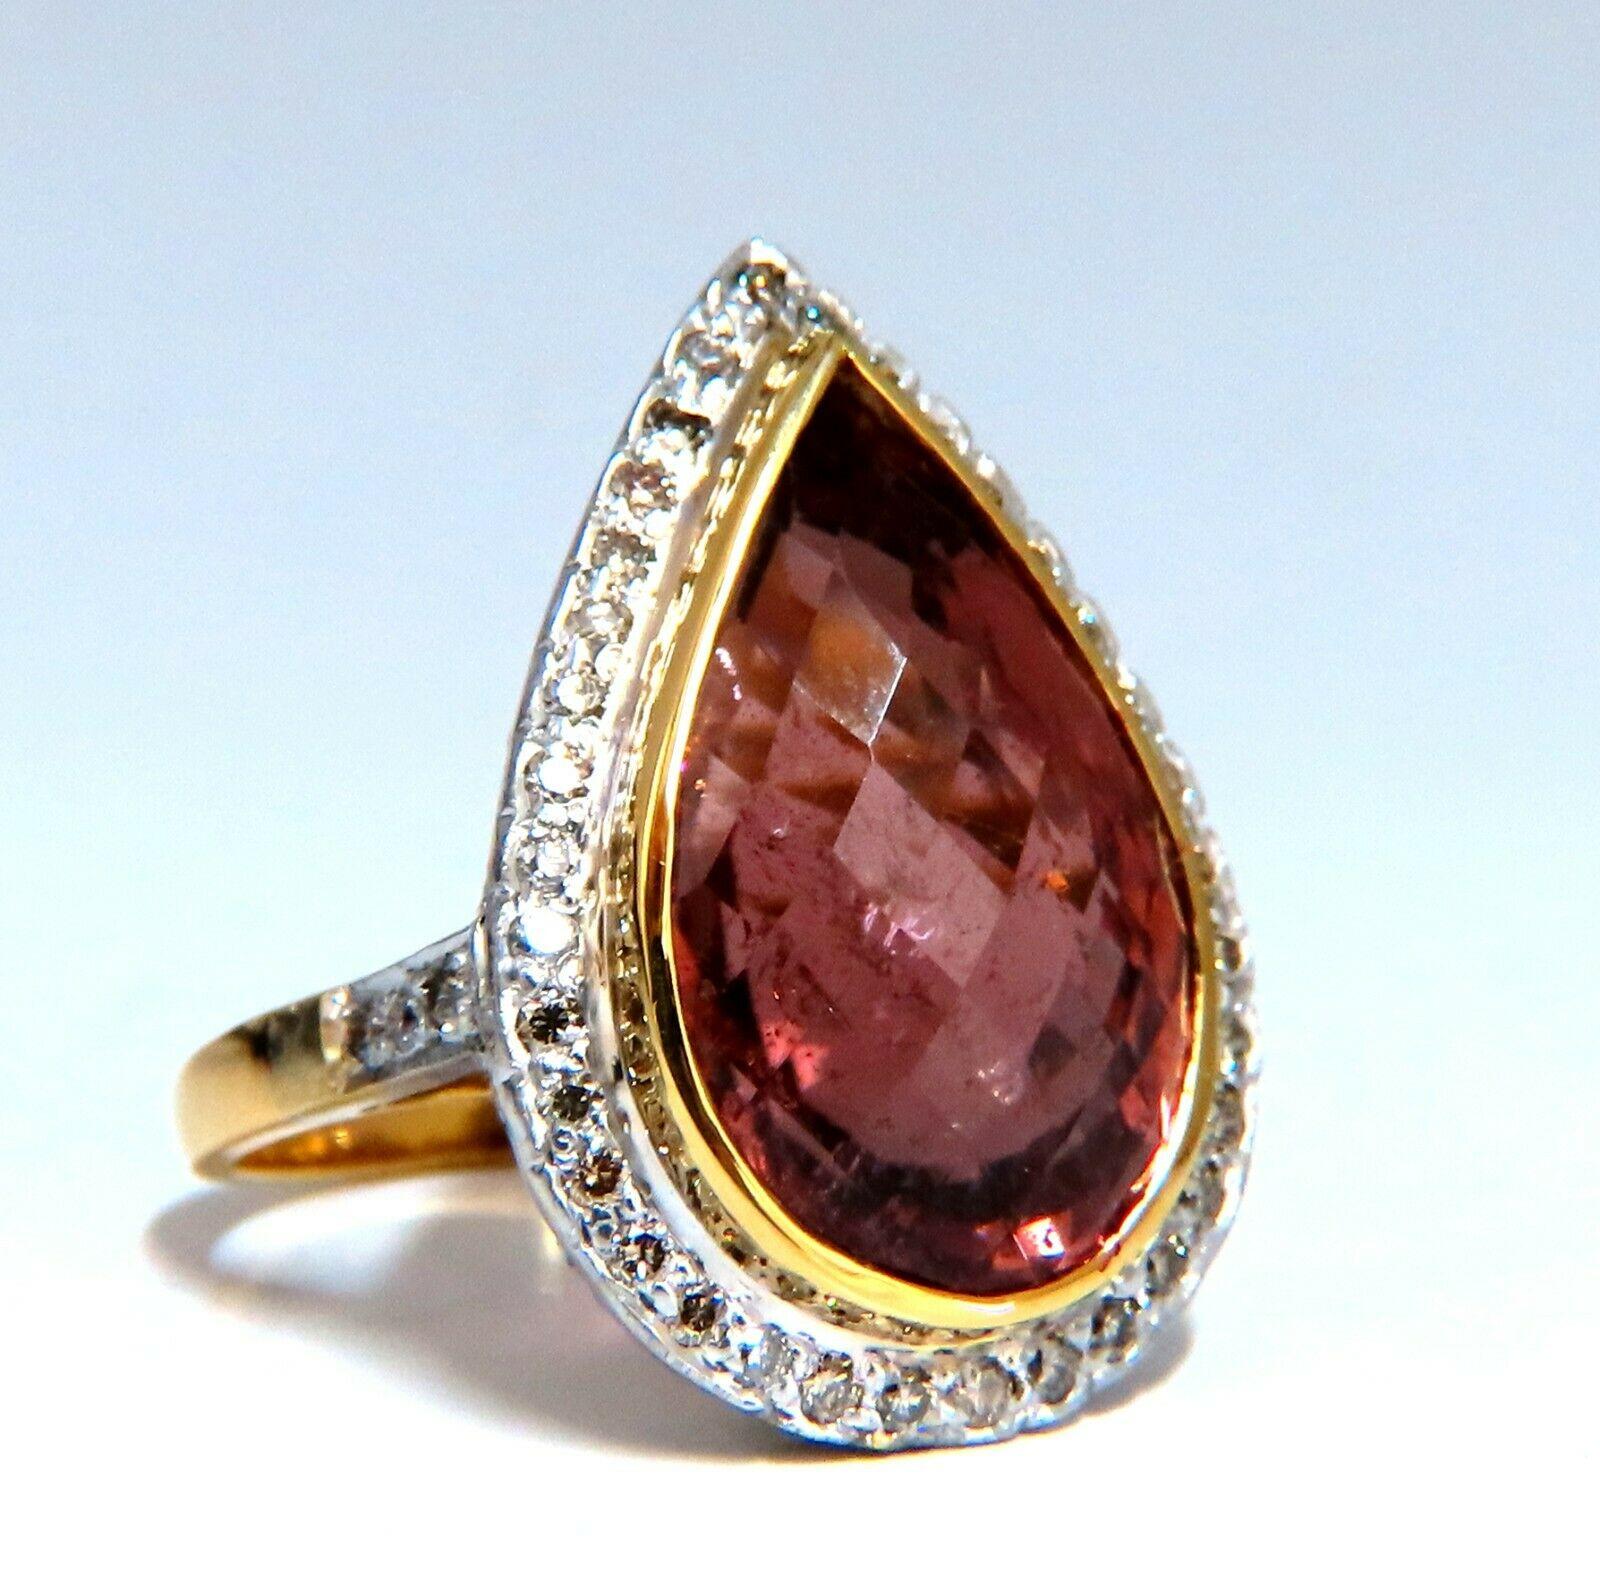 16ct. Natural Bright Pink Tourmaline Ring

Semi-clean clarity / A+ superb transparency

Pear cut, Fully Faceted and brilliant sparkles throughout

18 X 11mm



.75ct. natural diamonds.

Rounds and full cuts.

G color, Vs-2 clarity.



14kt. yellow